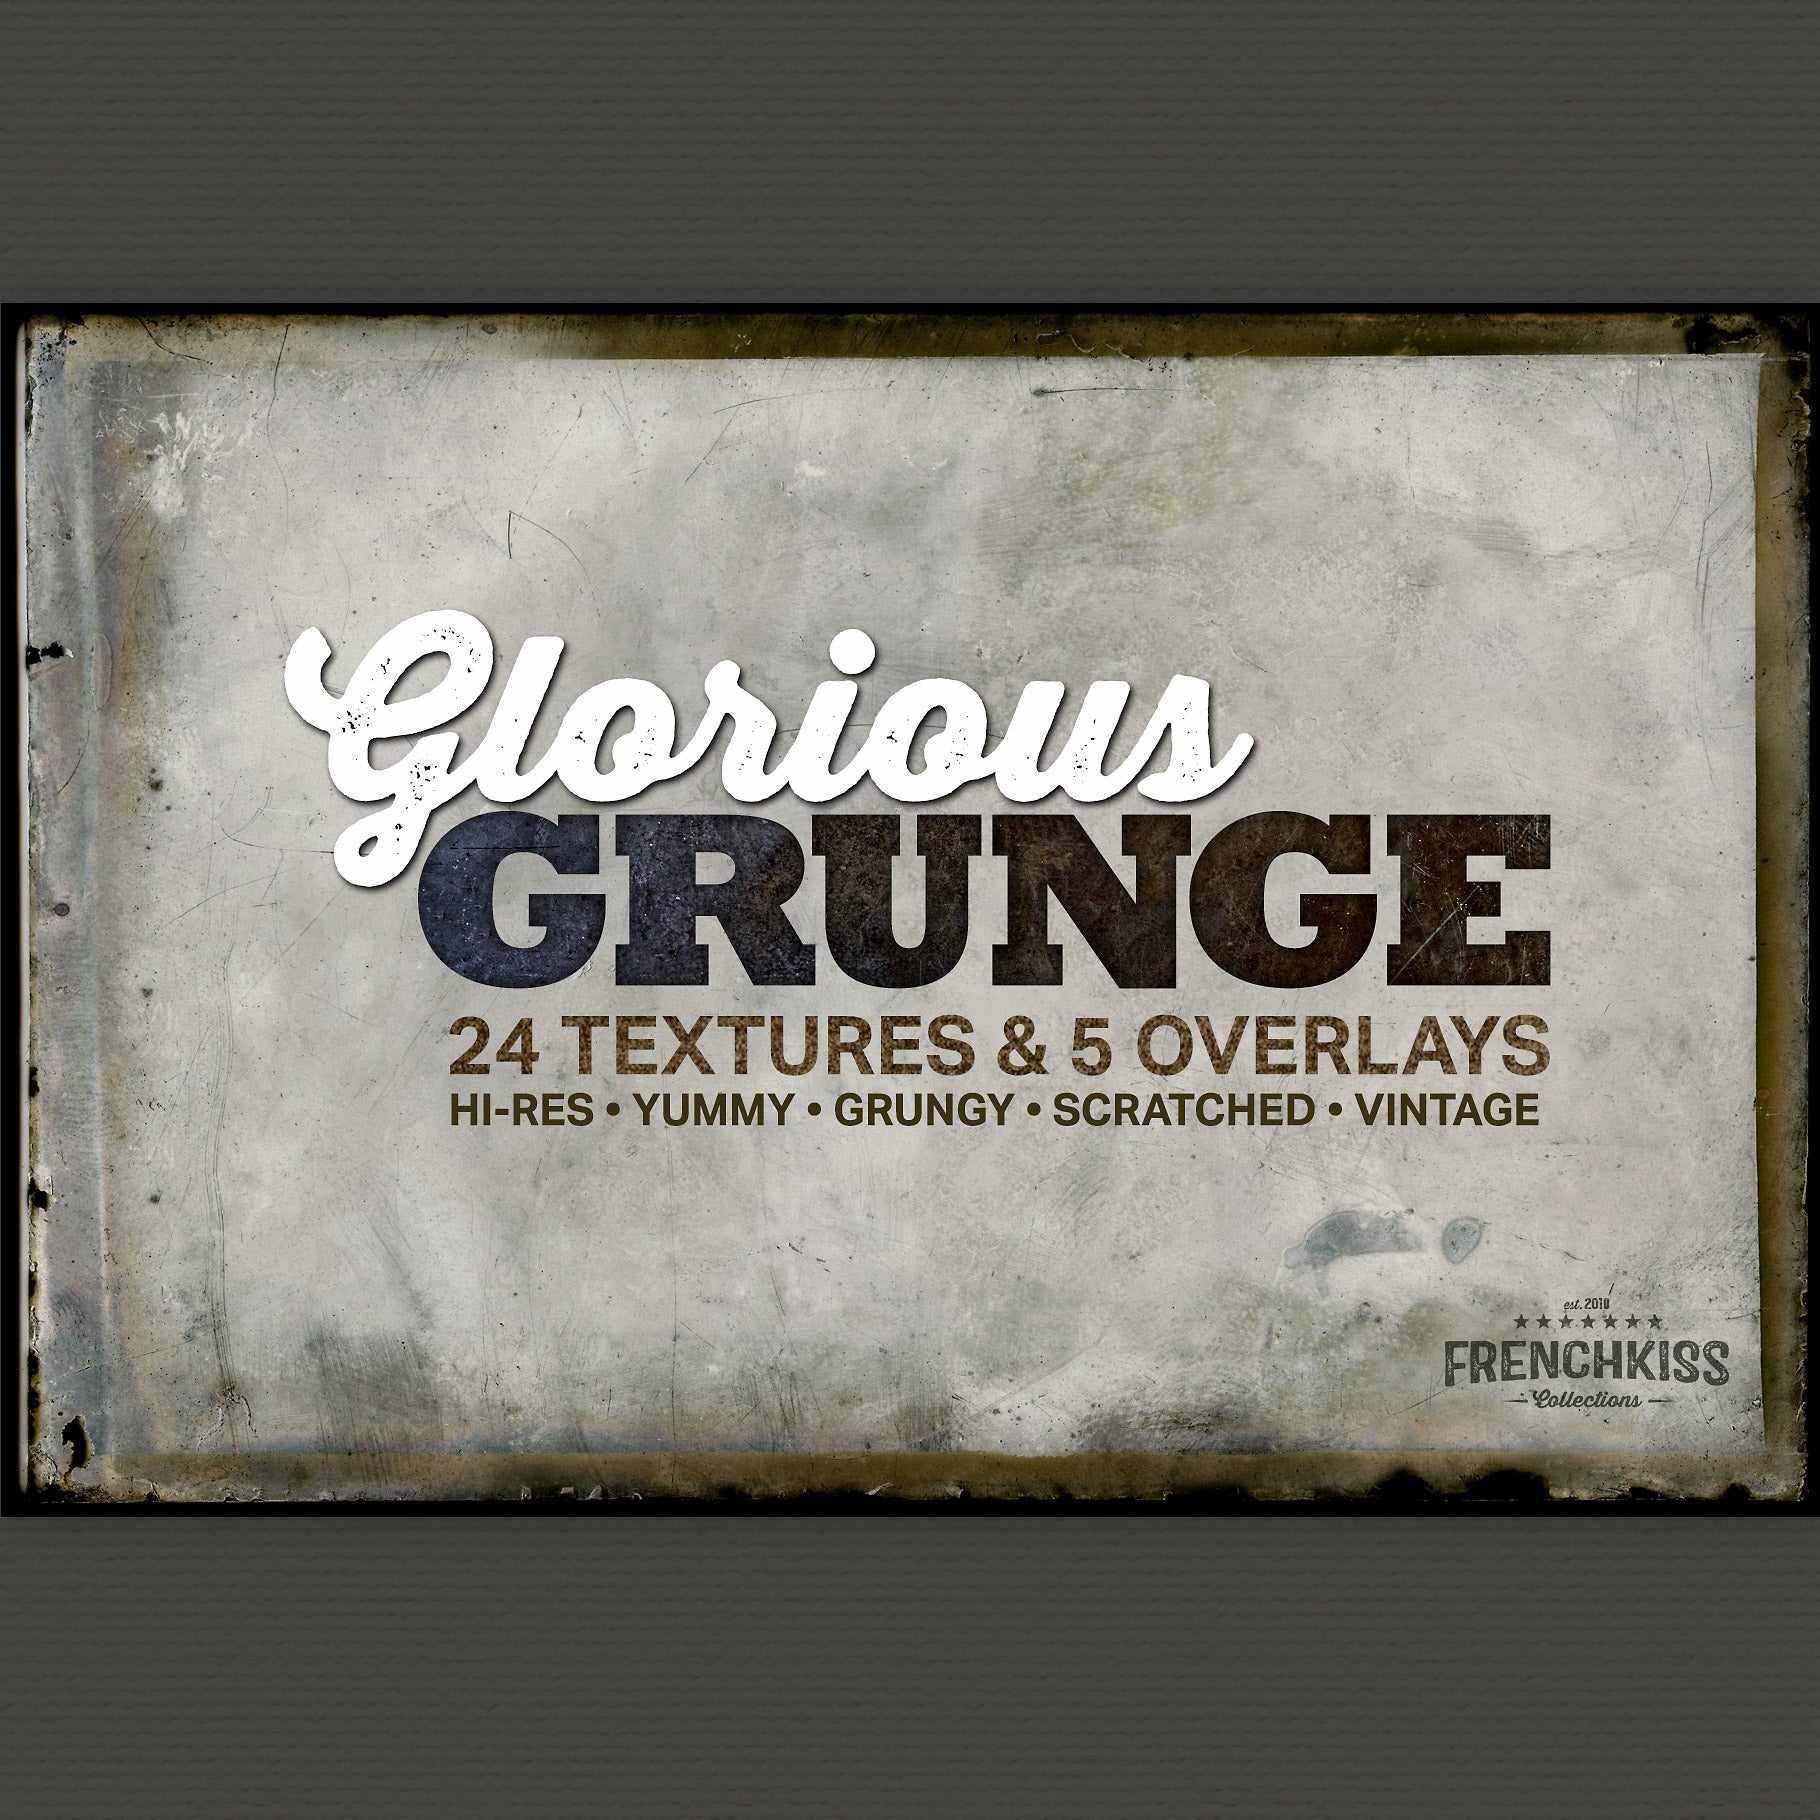 Fine art and grunge texture collection from old glass negatives and vintage papers. 